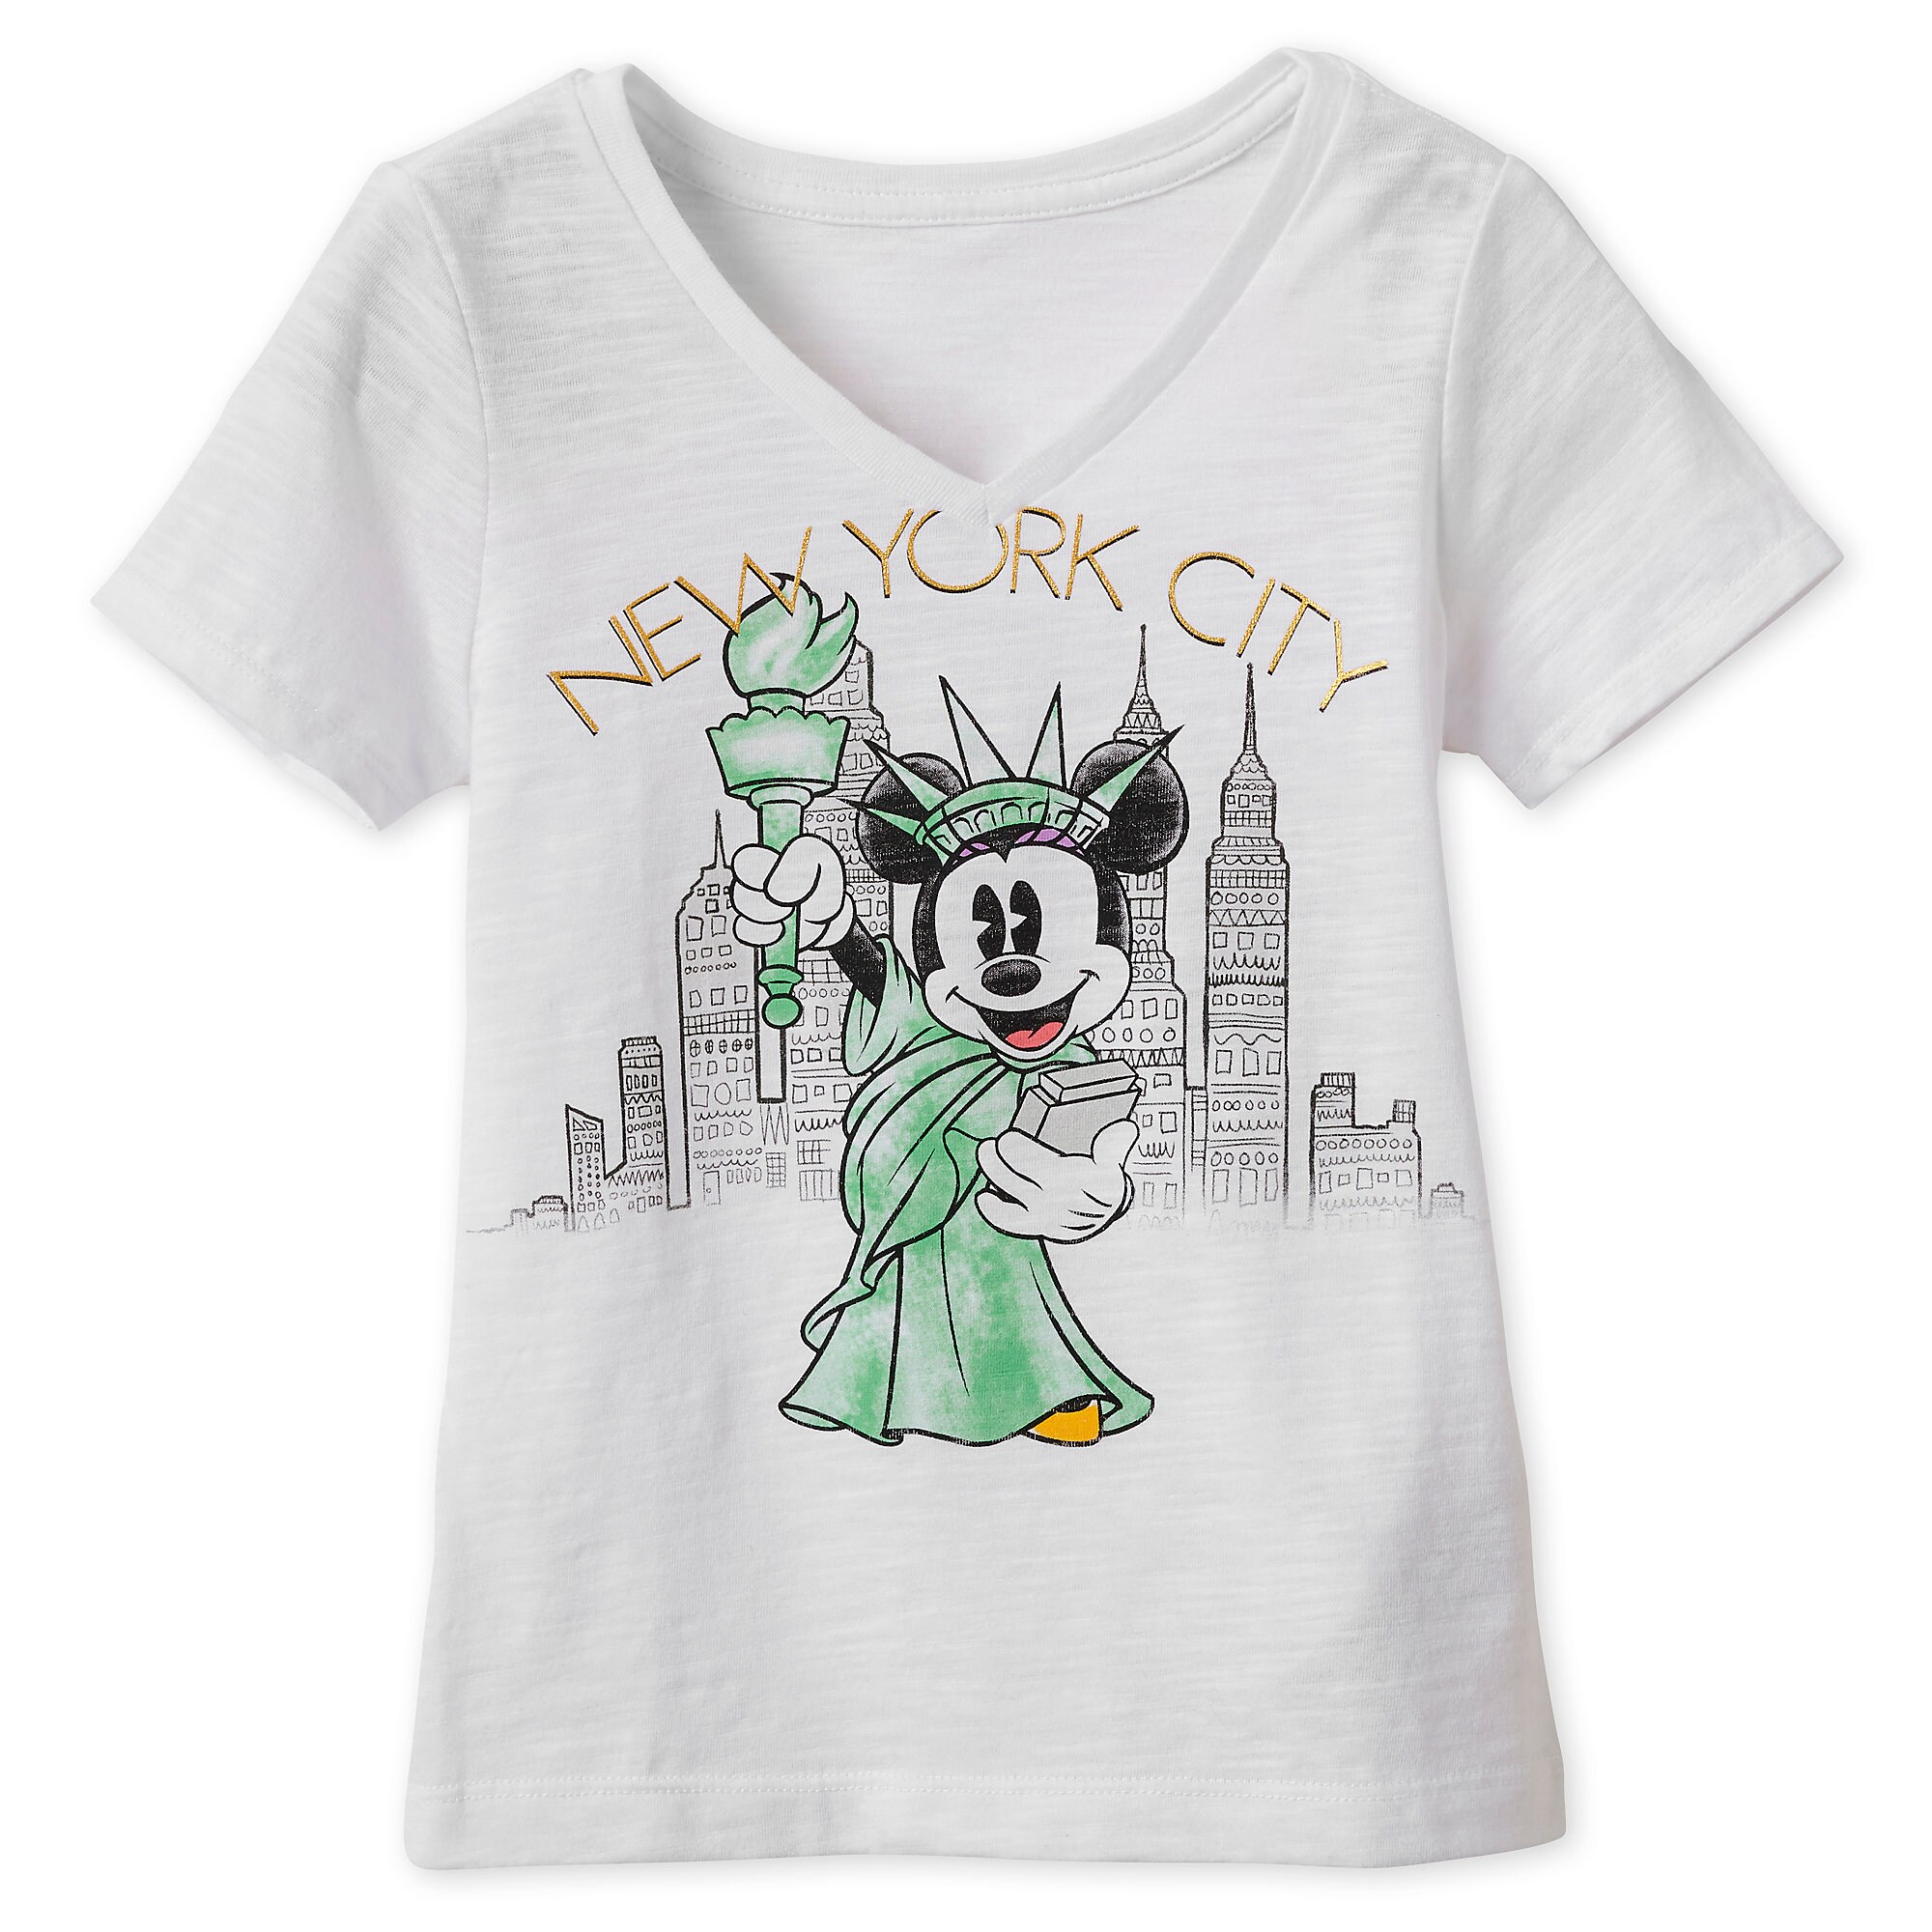 Minnie Mouse Statue of Liberty T-Shirt for Girls - New York City